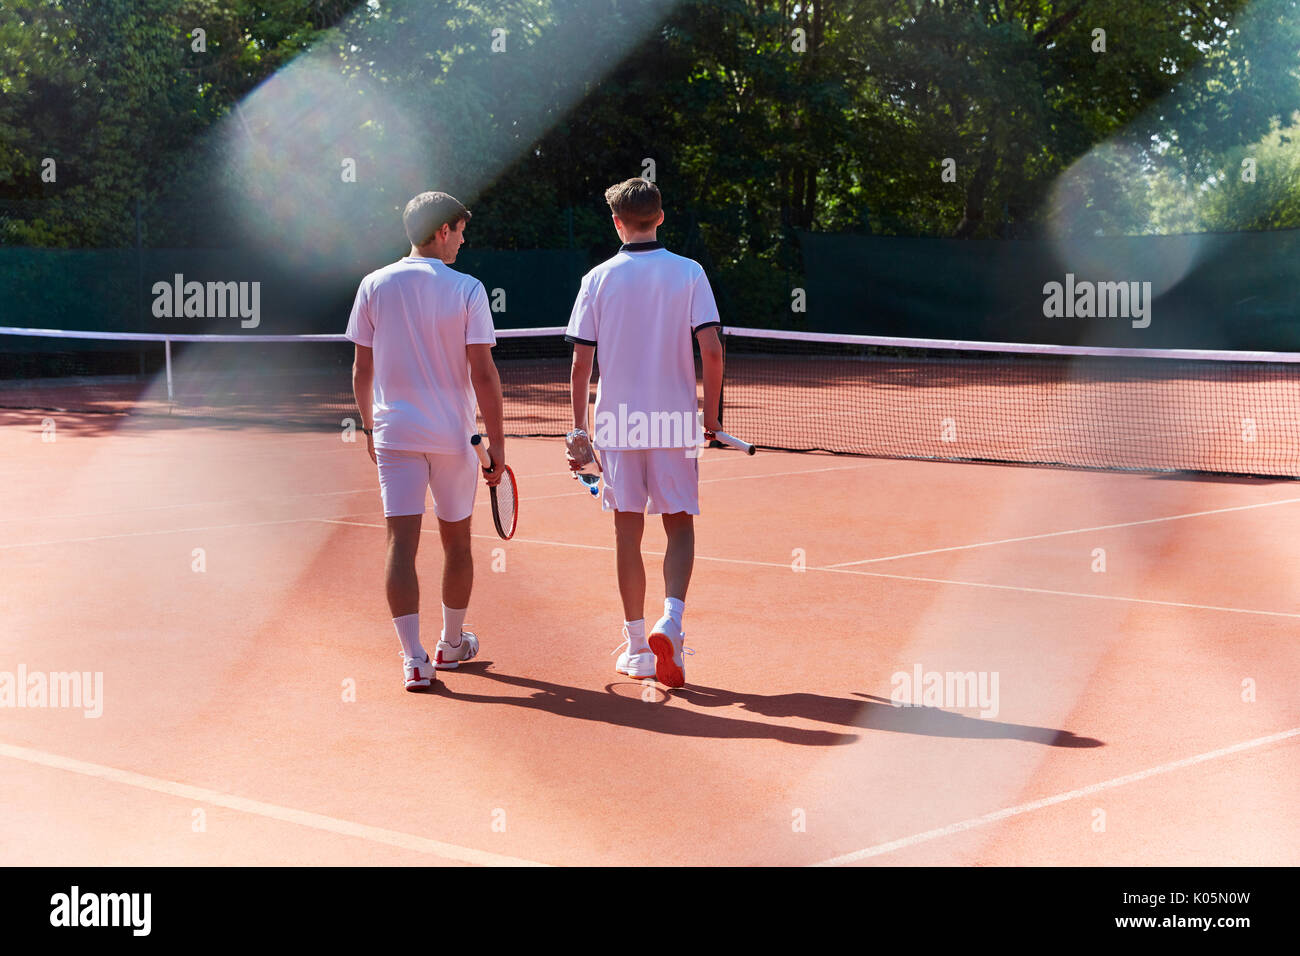 Young male tennis players walking with tennis rackets on sunny clay tennis court Stock Photo